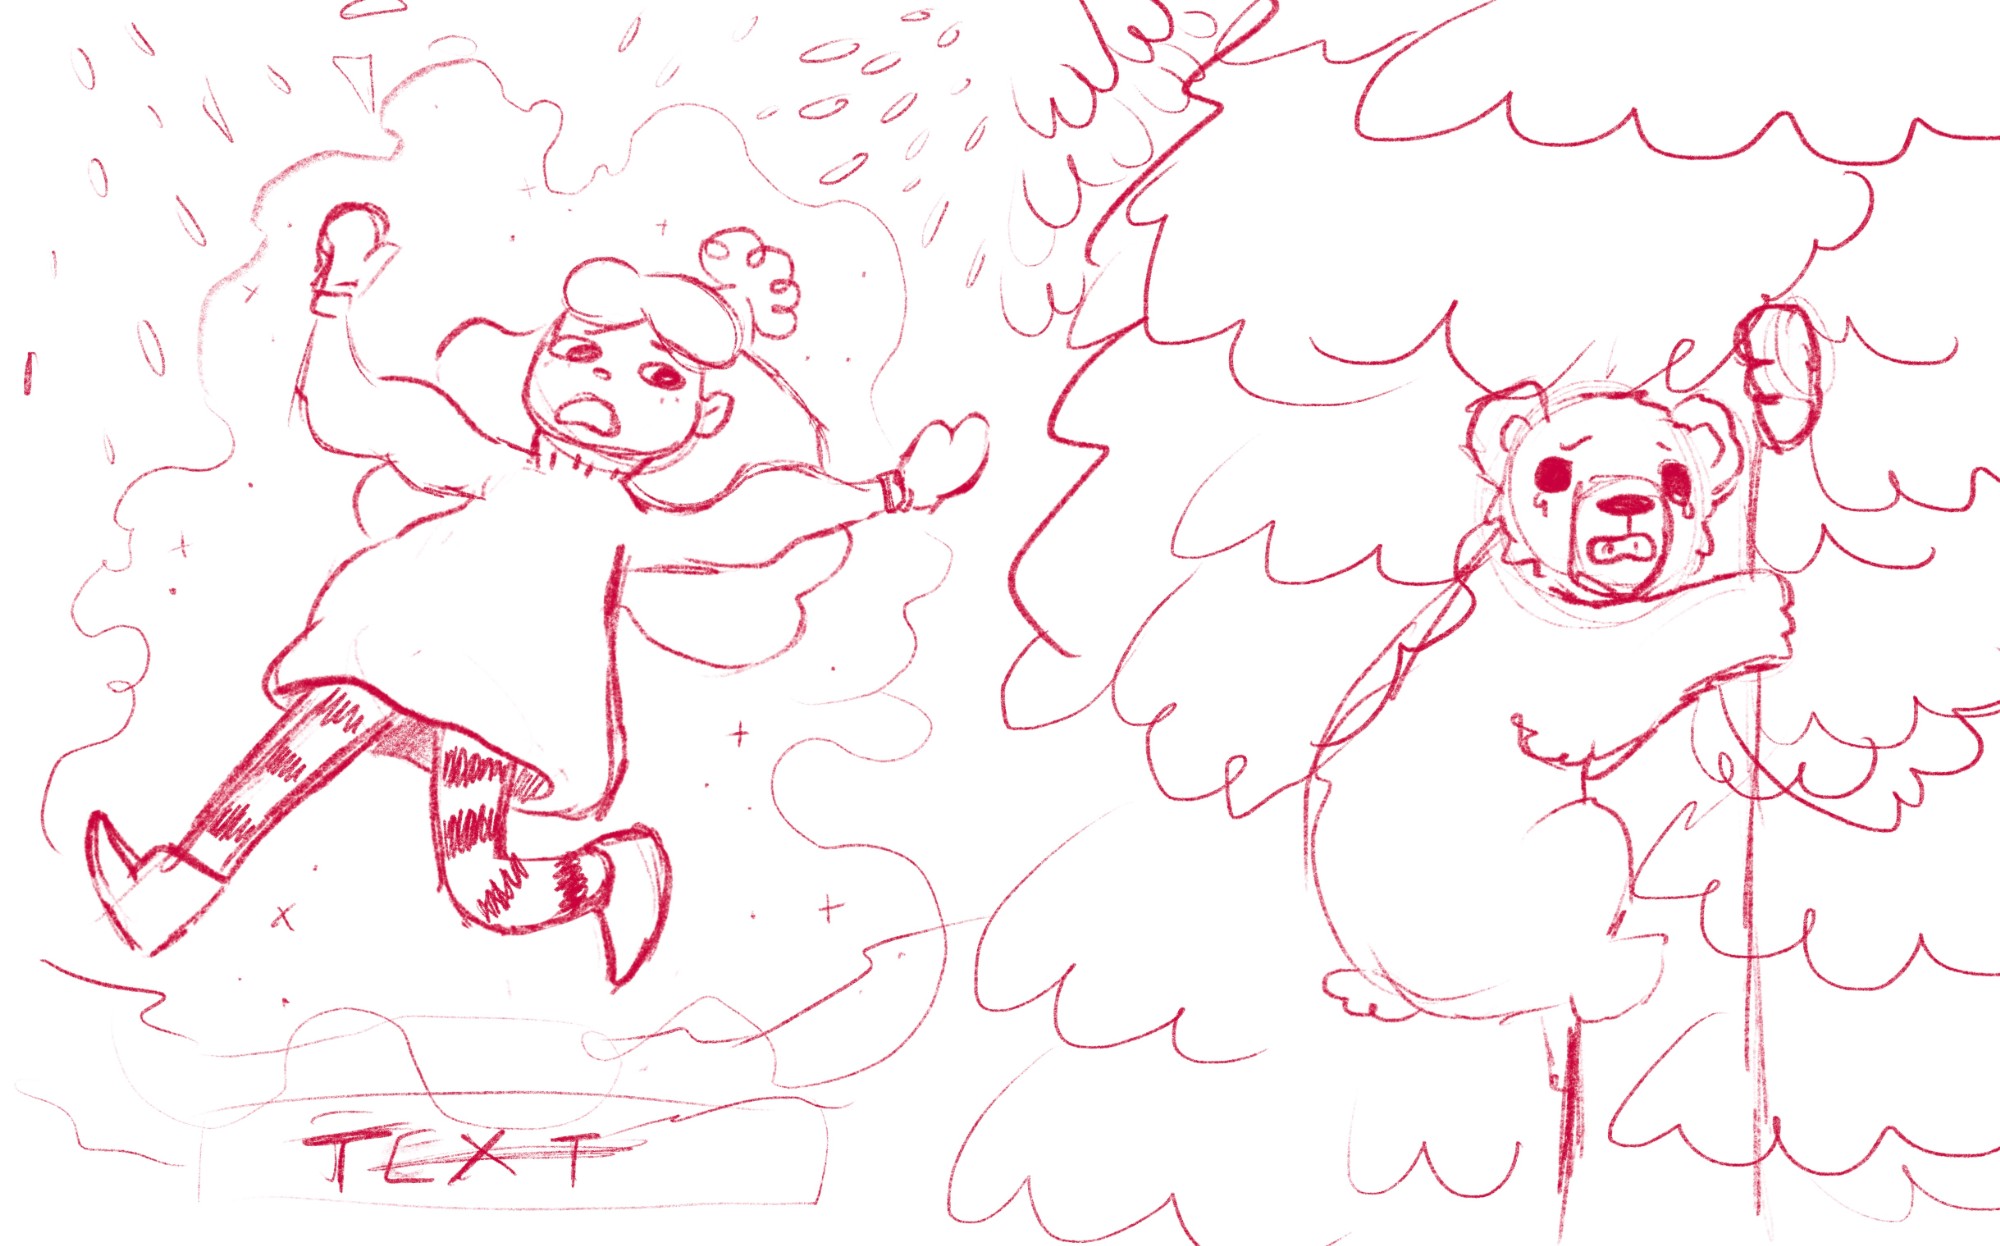 An early sketch of Hattie’s interaction with the bear